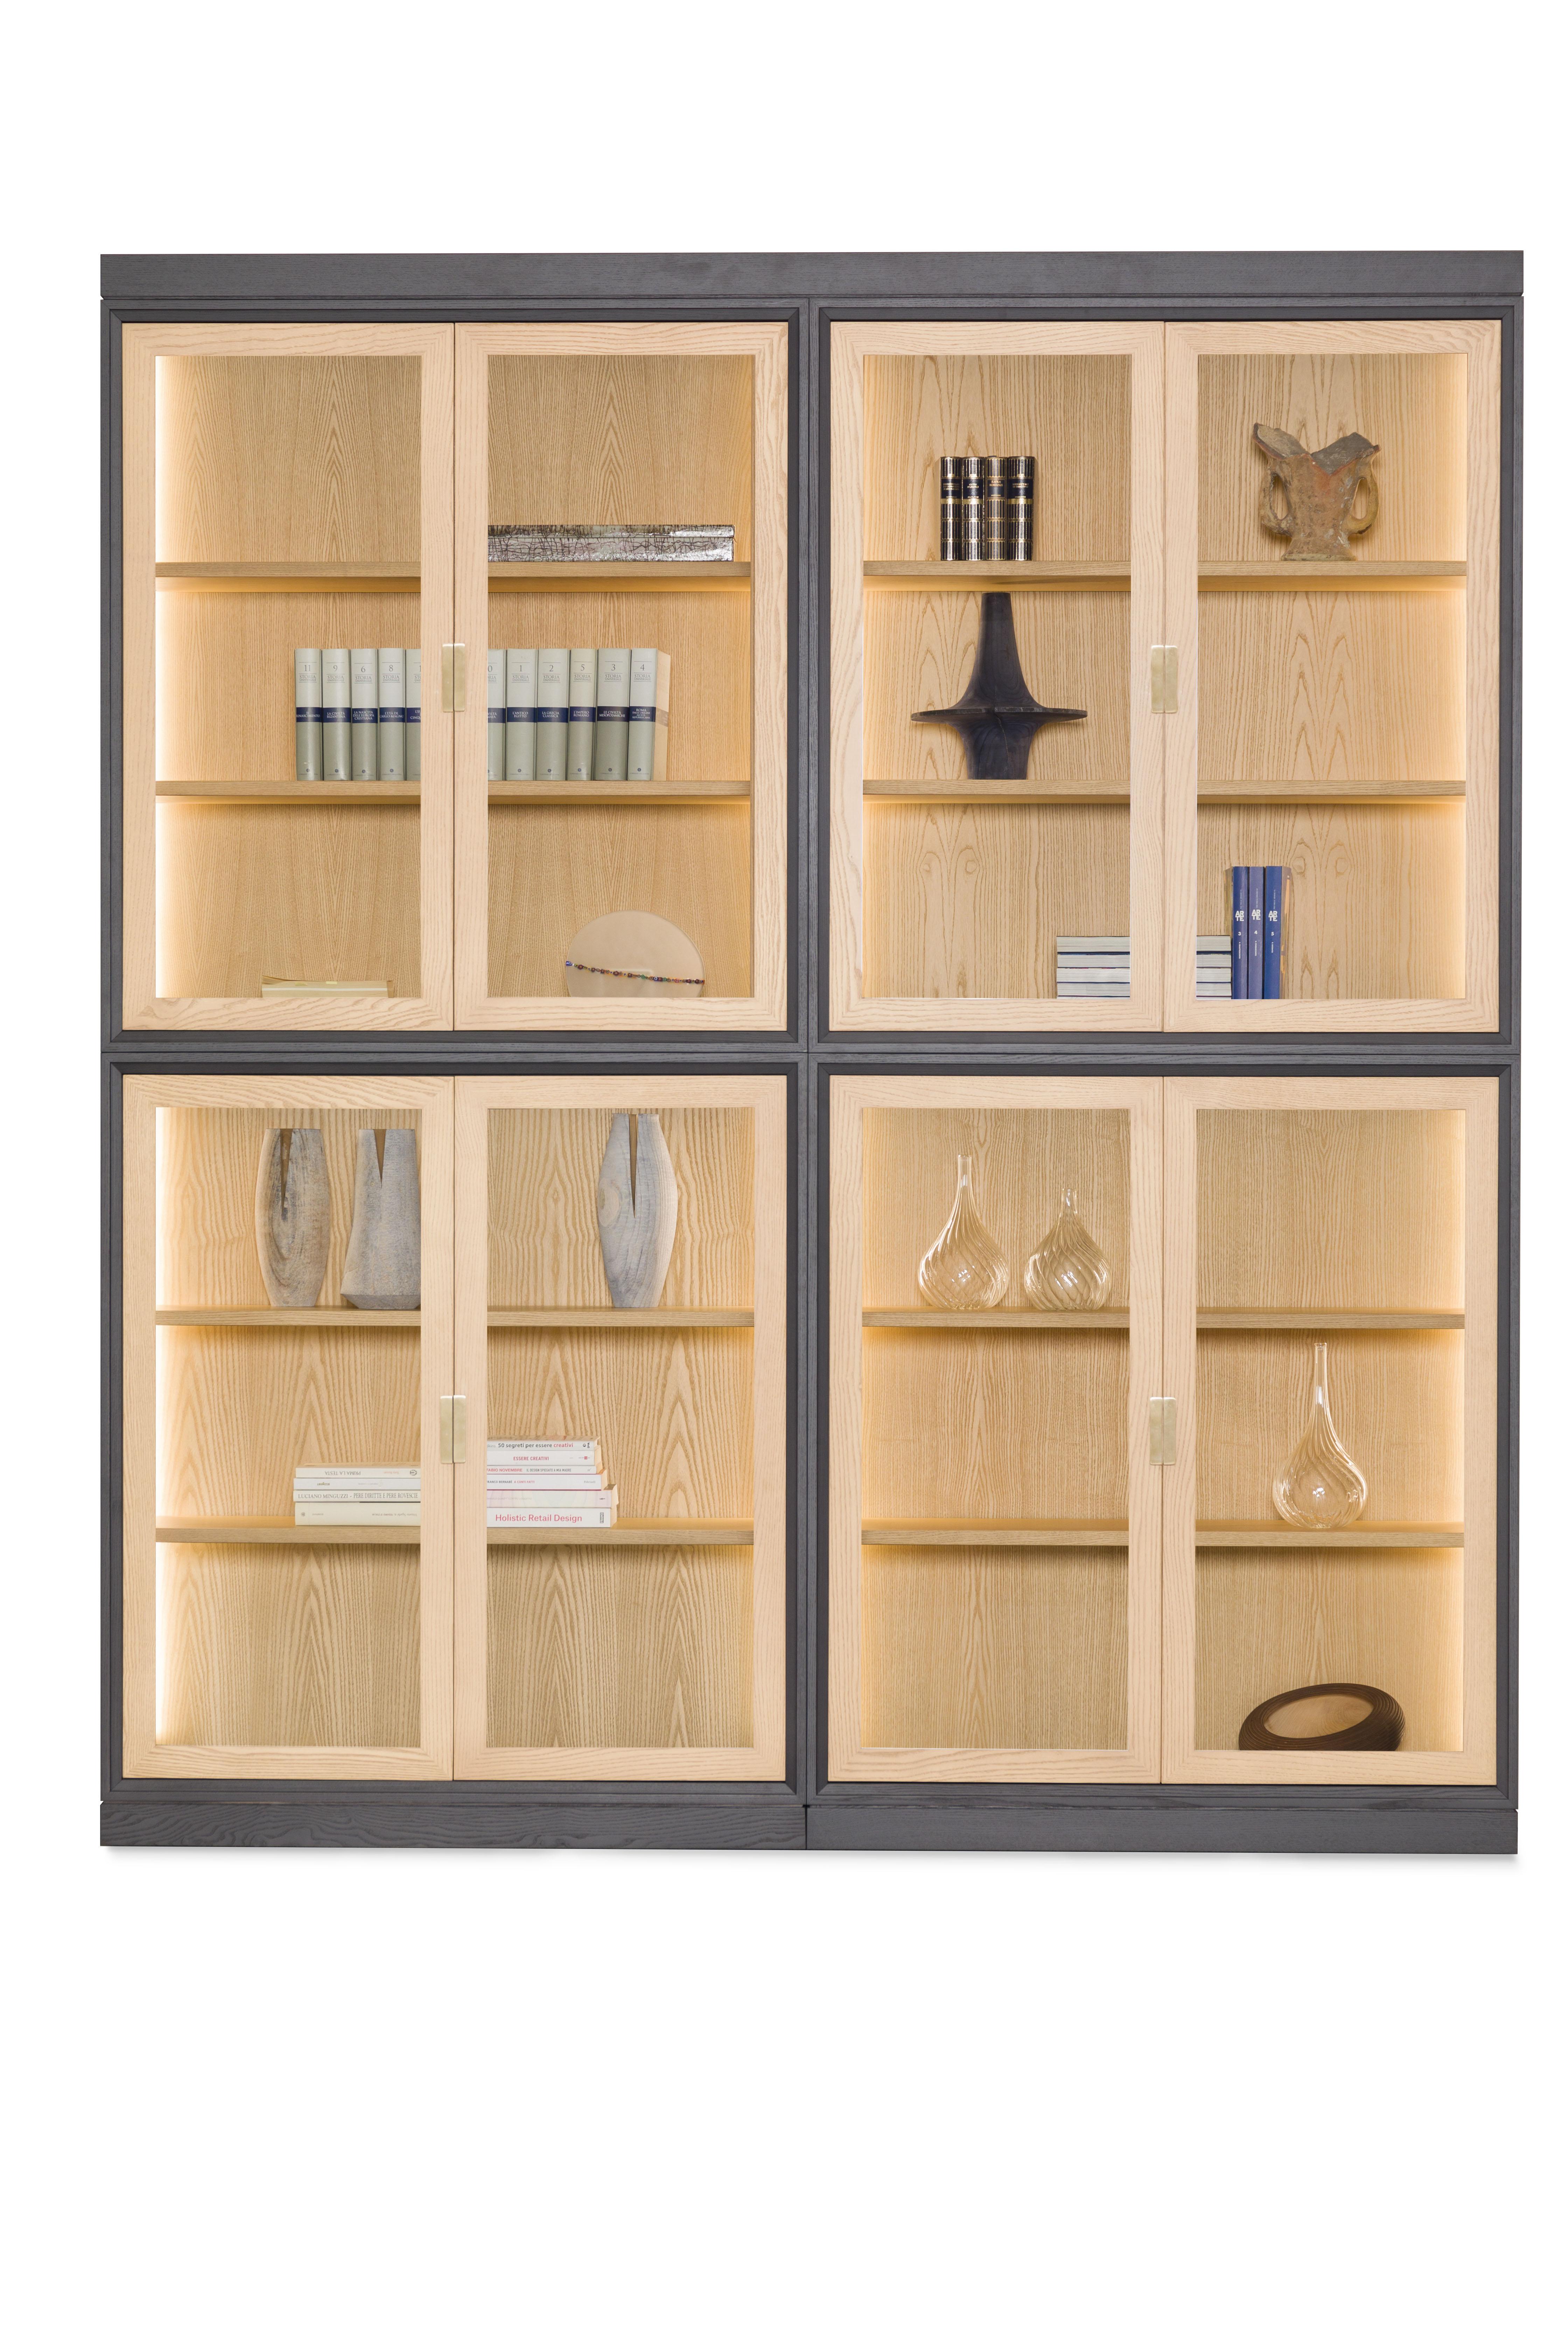 Novecento is a Contemporary style bookcase with doors and adjustable shelves.
Inside the modules a warm led light highlights the objects they contain.

The structure is made of ash wood, handles are brass

Made in Italy by Morelato.

Made to